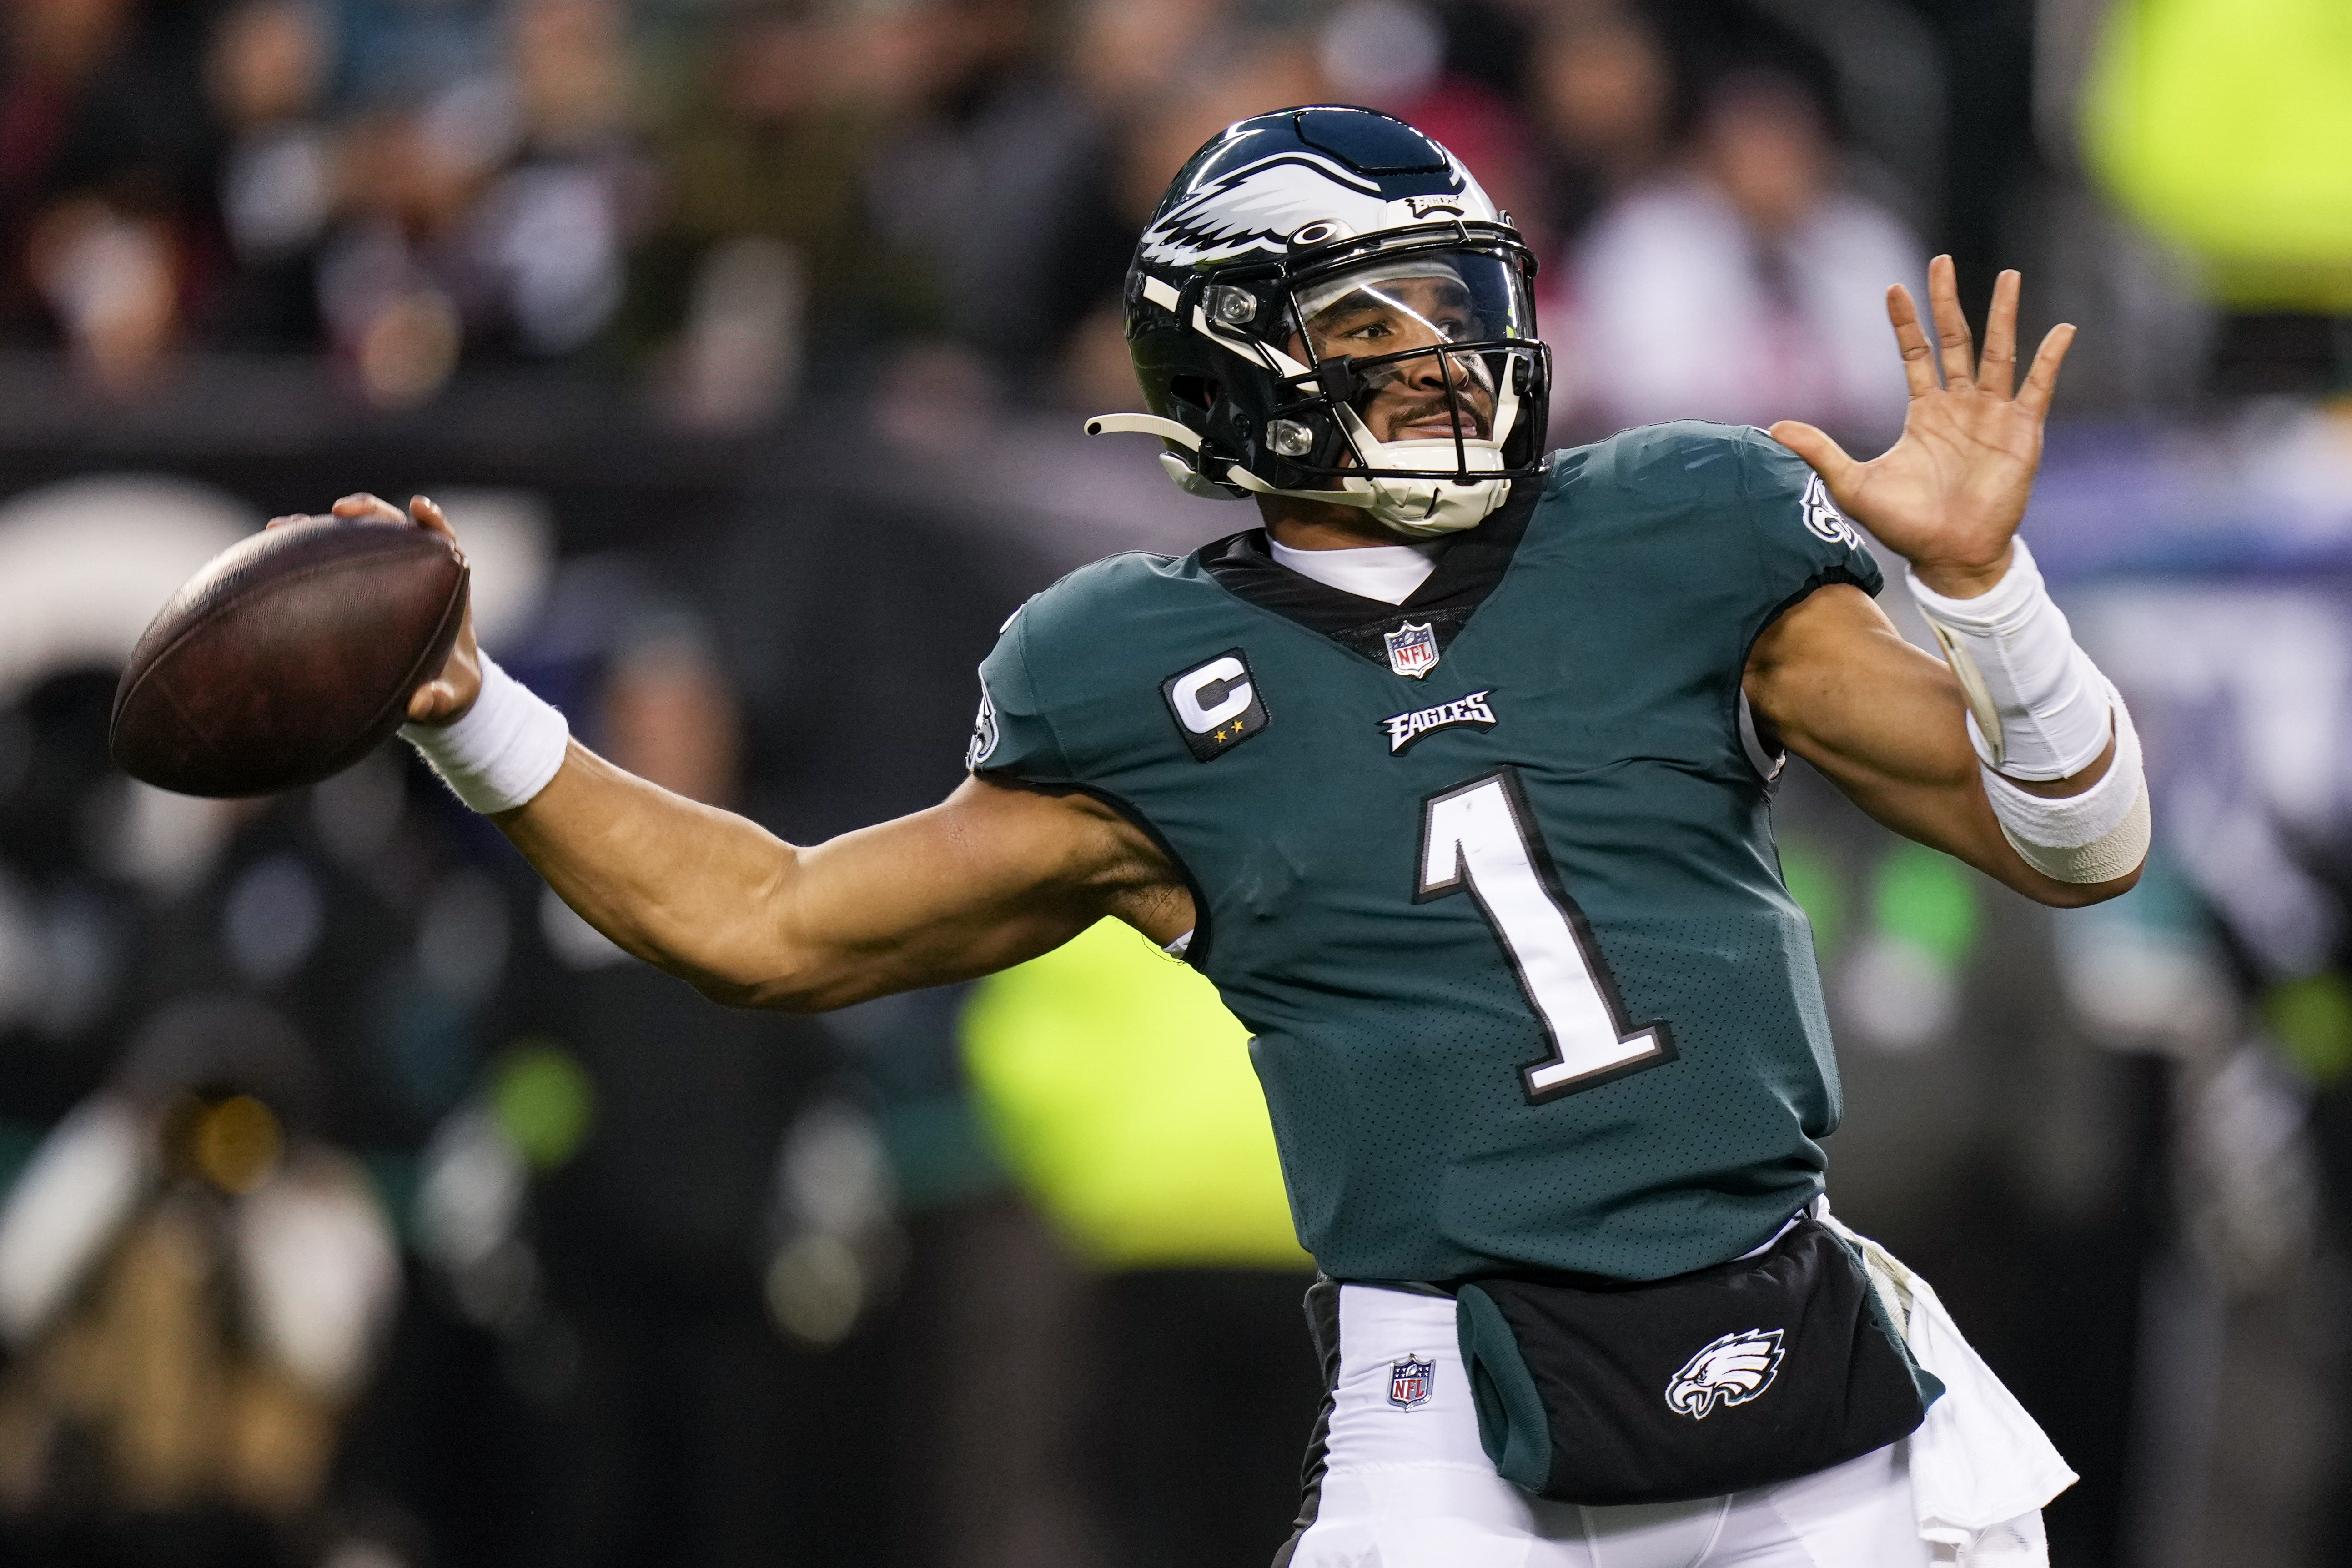 Super Bowl 2023 early odds: Eagles favorites vs. Chiefs